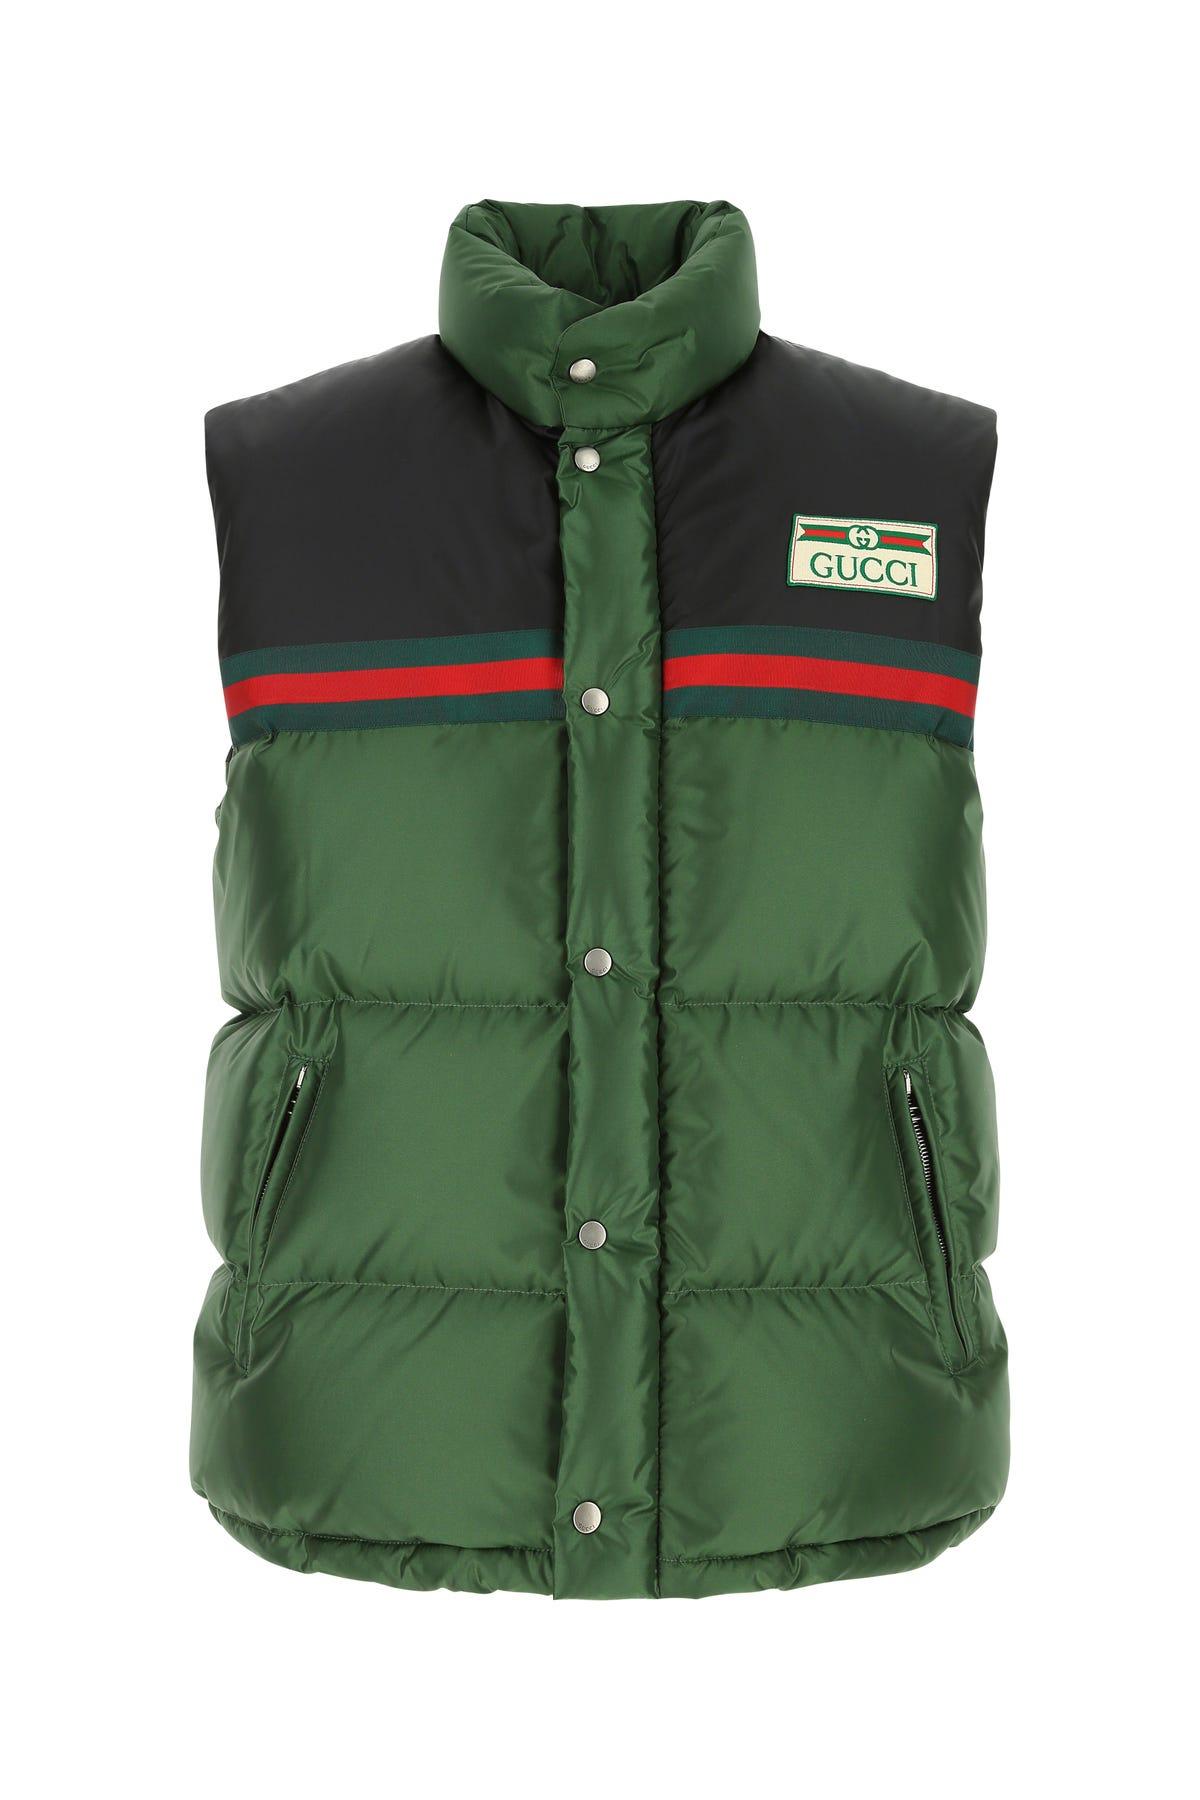 Gucci Multicolor Nylon Sleeveless Down Jacket in Green for Men | Lyst